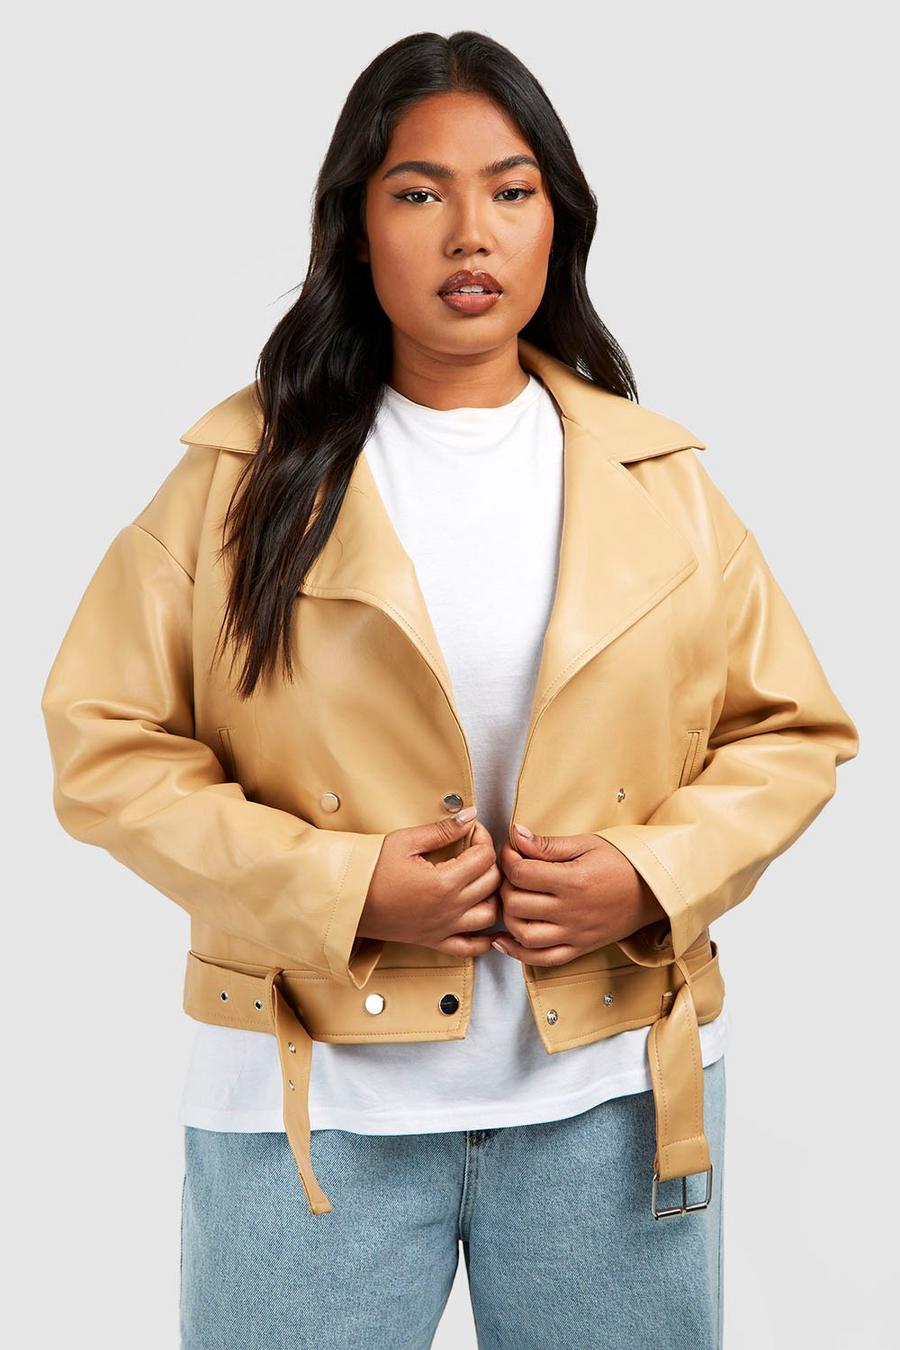 New In Plus Size Clothing | New Plus Size Clothing | boohoo USA